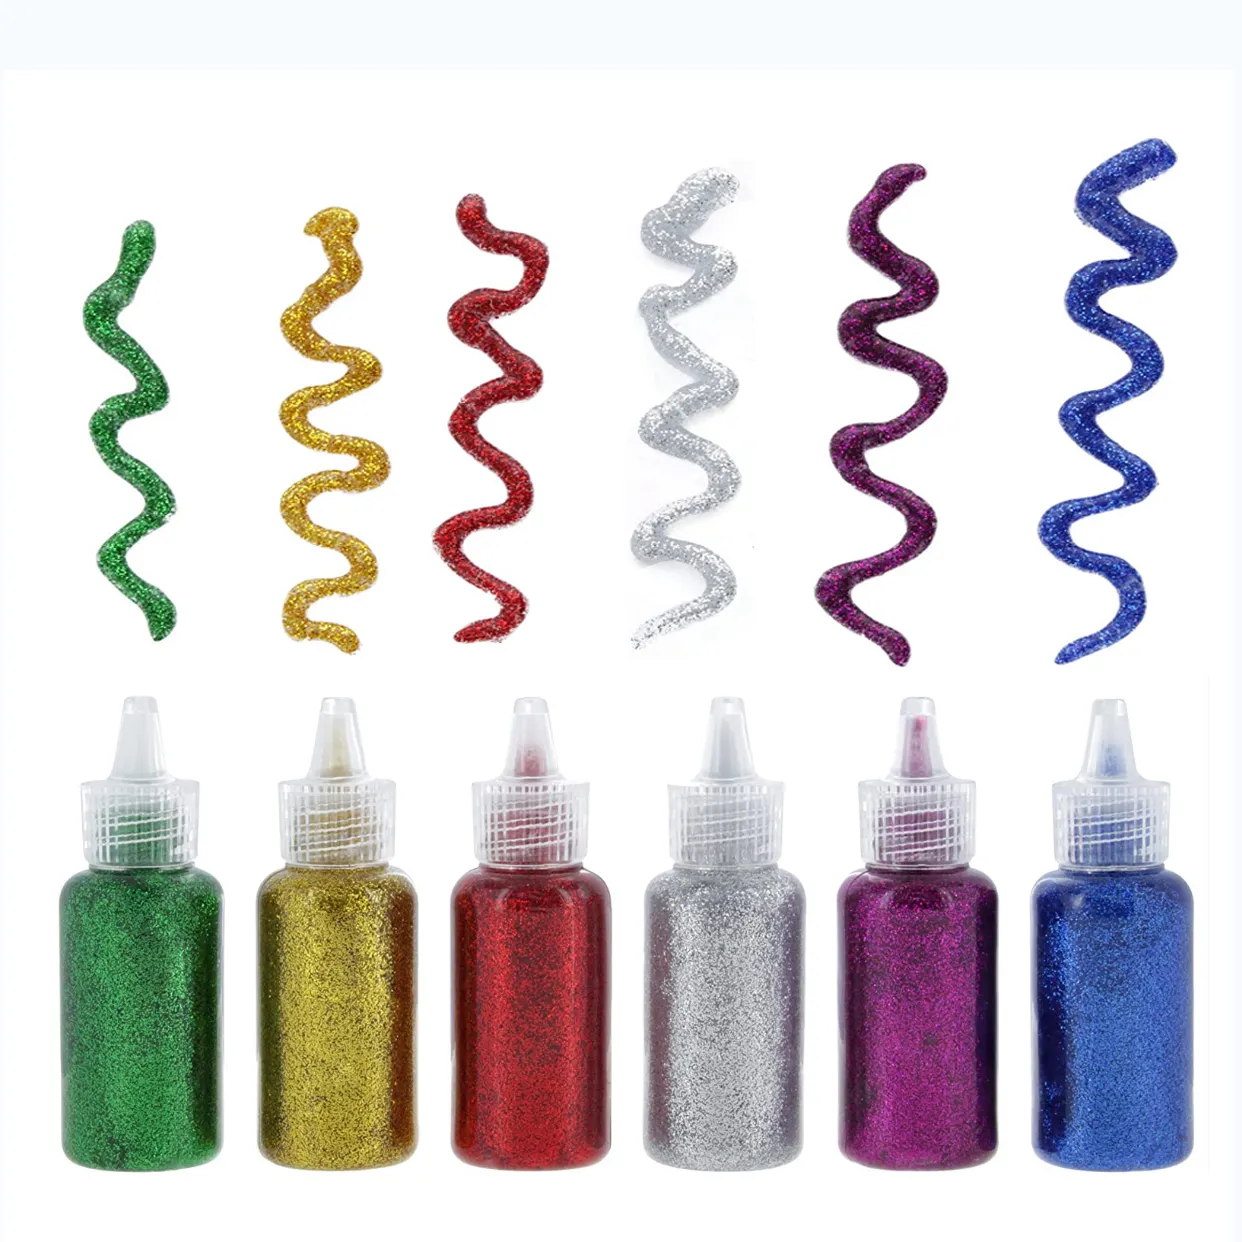 6 Bright Classic Colors 20ml Glitter Glue Set for Gluing, Drawing, Writing, Outlining